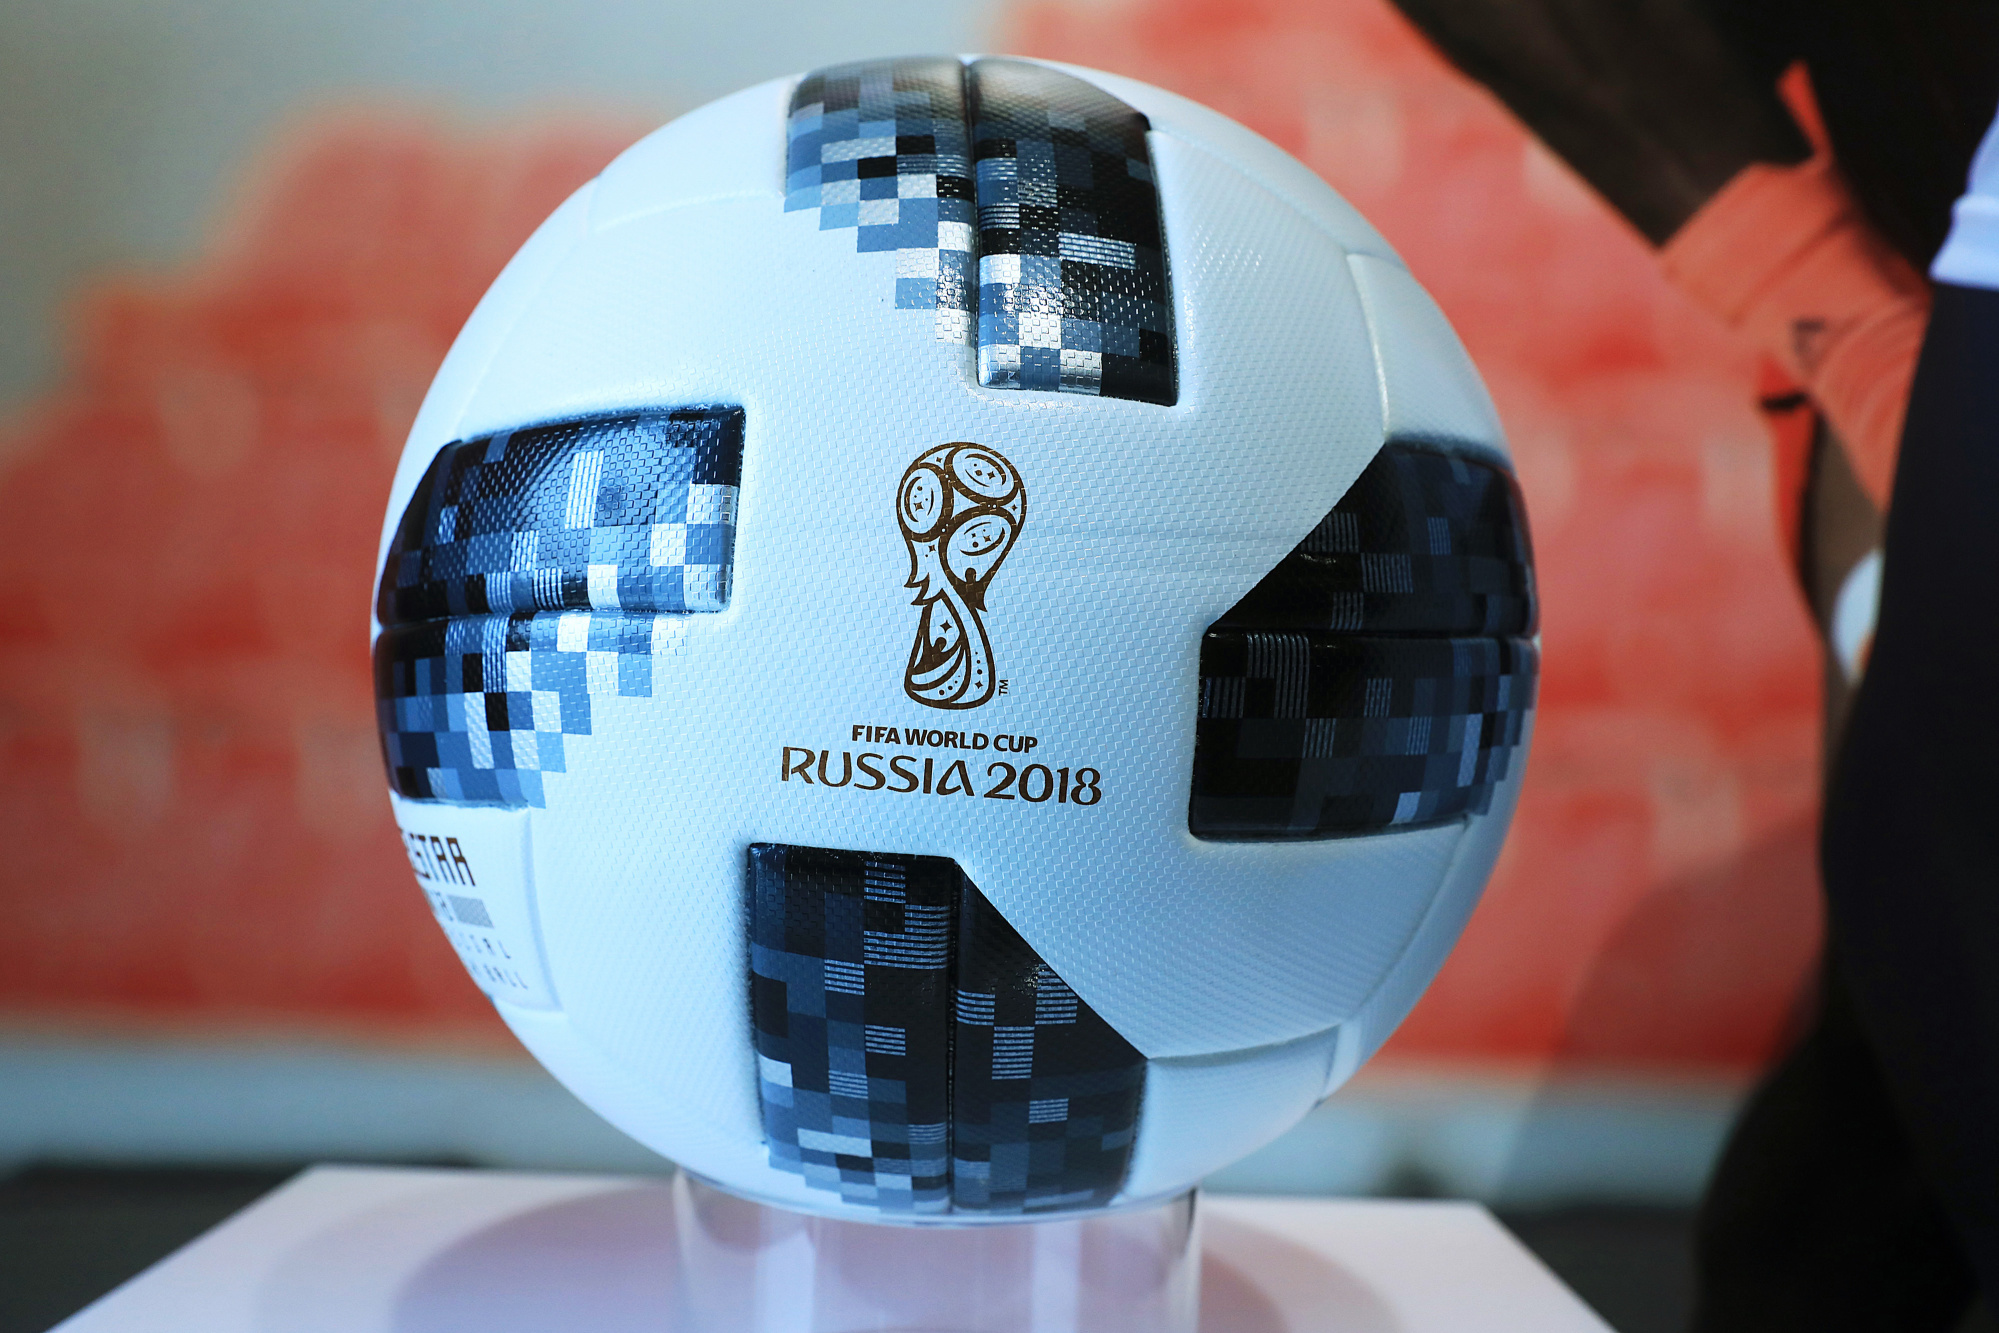 An official Adidas AG 2018 FIFA World Cup Russia soccer ball sits on display during the company's annual results announcement in Herzogenaurach, Germany, on Wednesday, March 14, 2018. Photographer: Krisztian Bocsi/Bloomberg